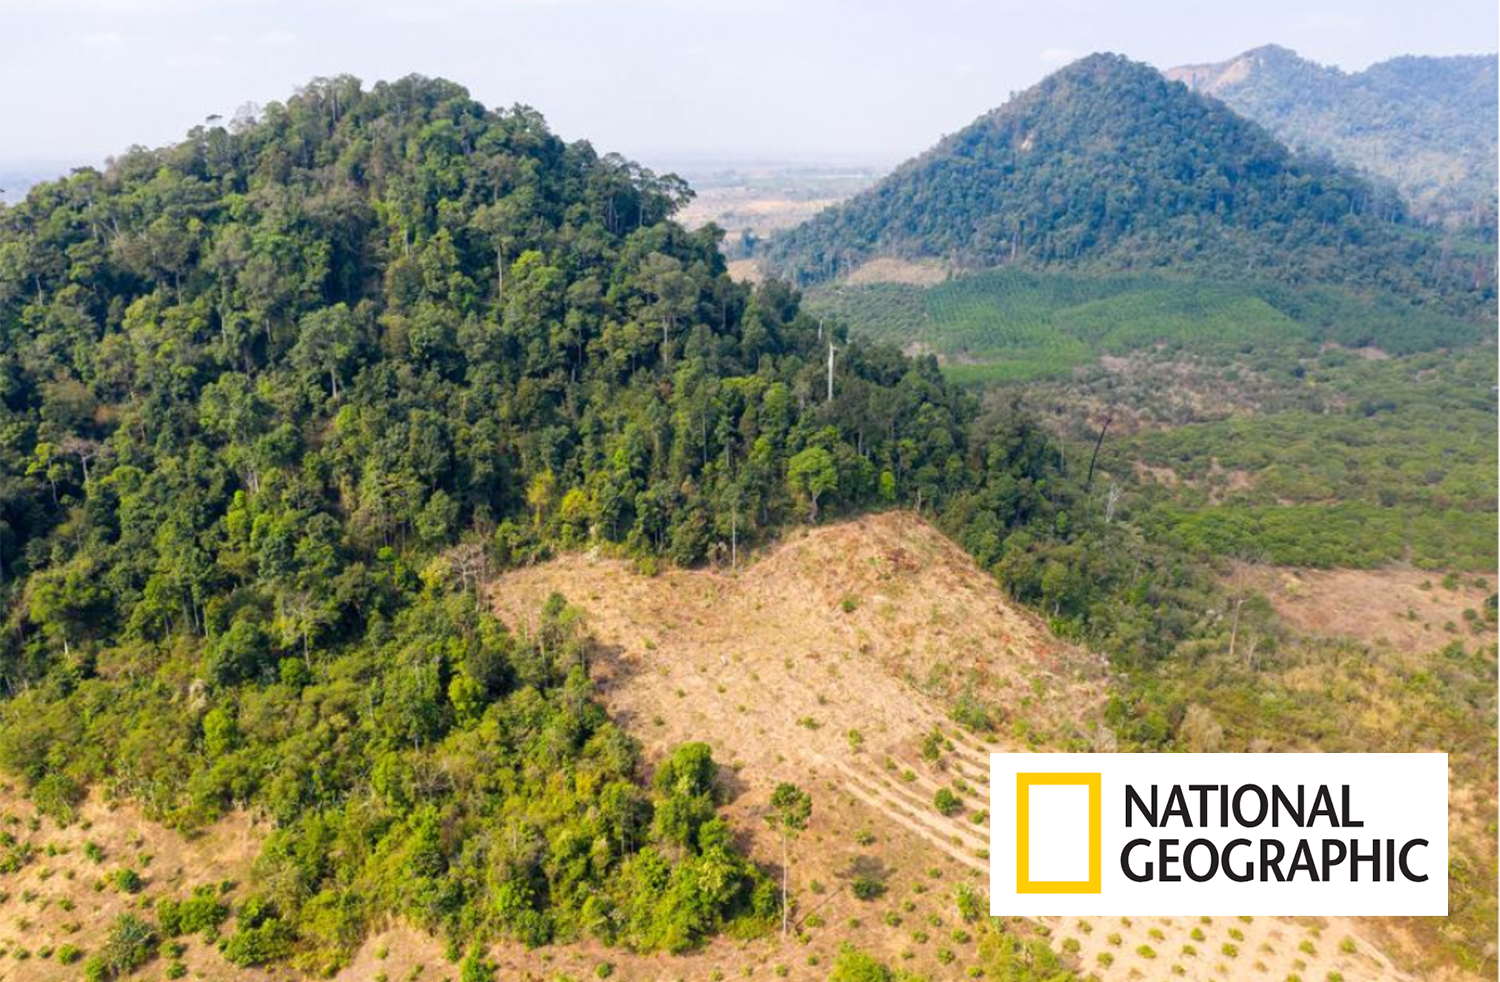 Cleared forests in Preah Vihear Province, in northern Cambodia near the border with Laos. The South East Asian country has one of the fastest rates of deforestation in the world; it's estimated that only 3 percent of primary forest remains. Image by Sean Gallagher. Cambodia, 2020.